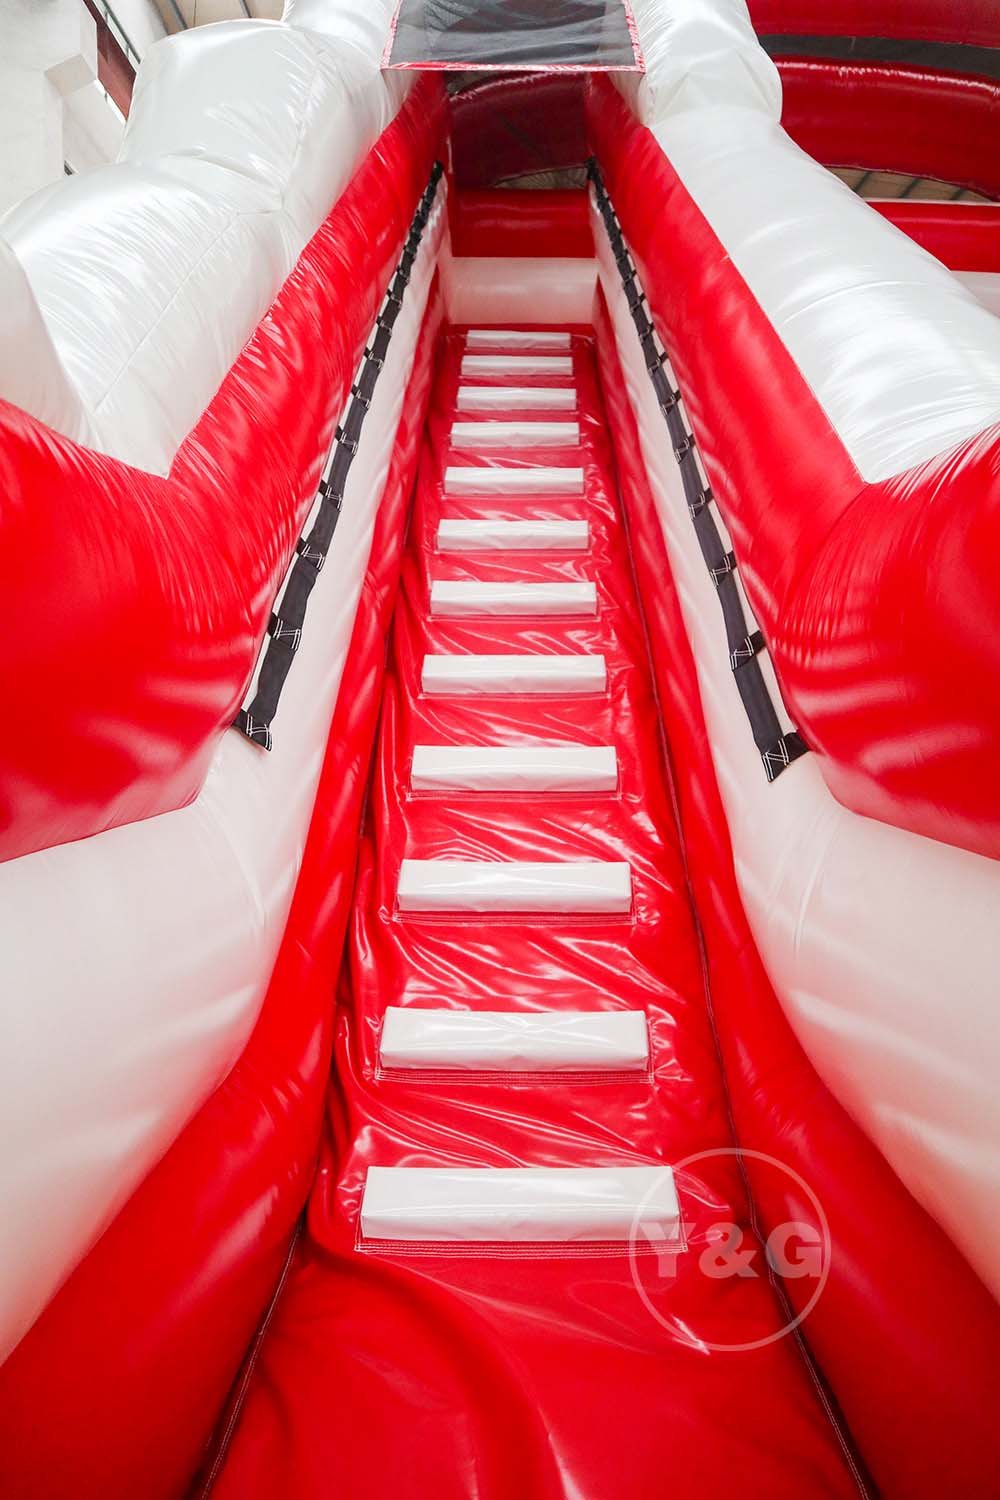 commercial inflatable cliff jumpingYGG105